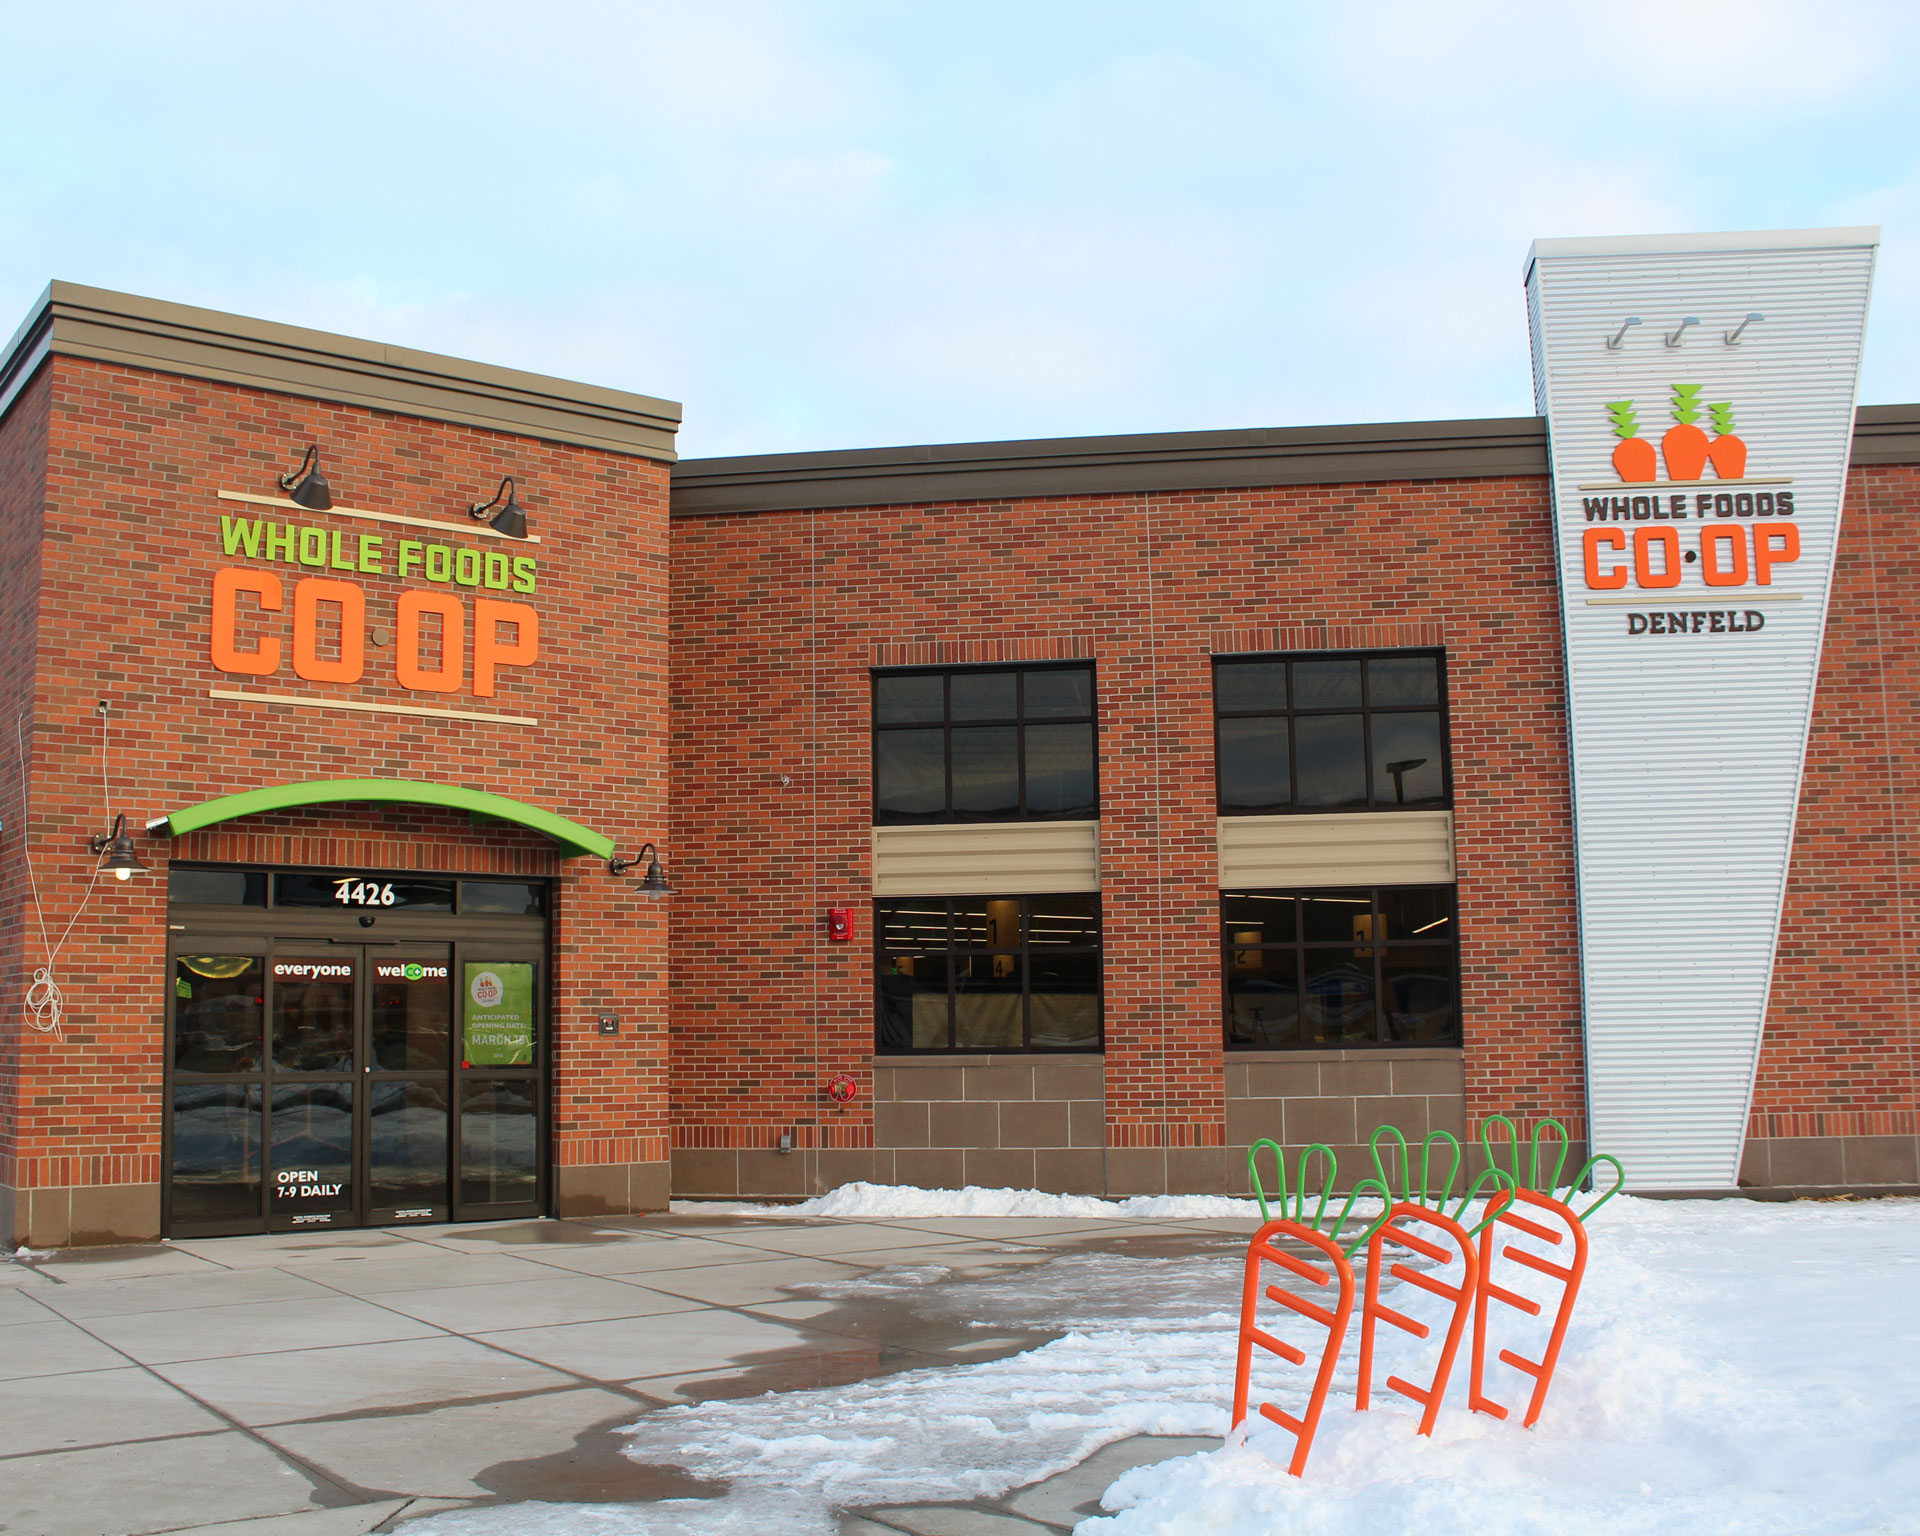 A brick building with large windows houses the Whole Foods Coop Duluth MN. The entrance has an orange awning above the door with 